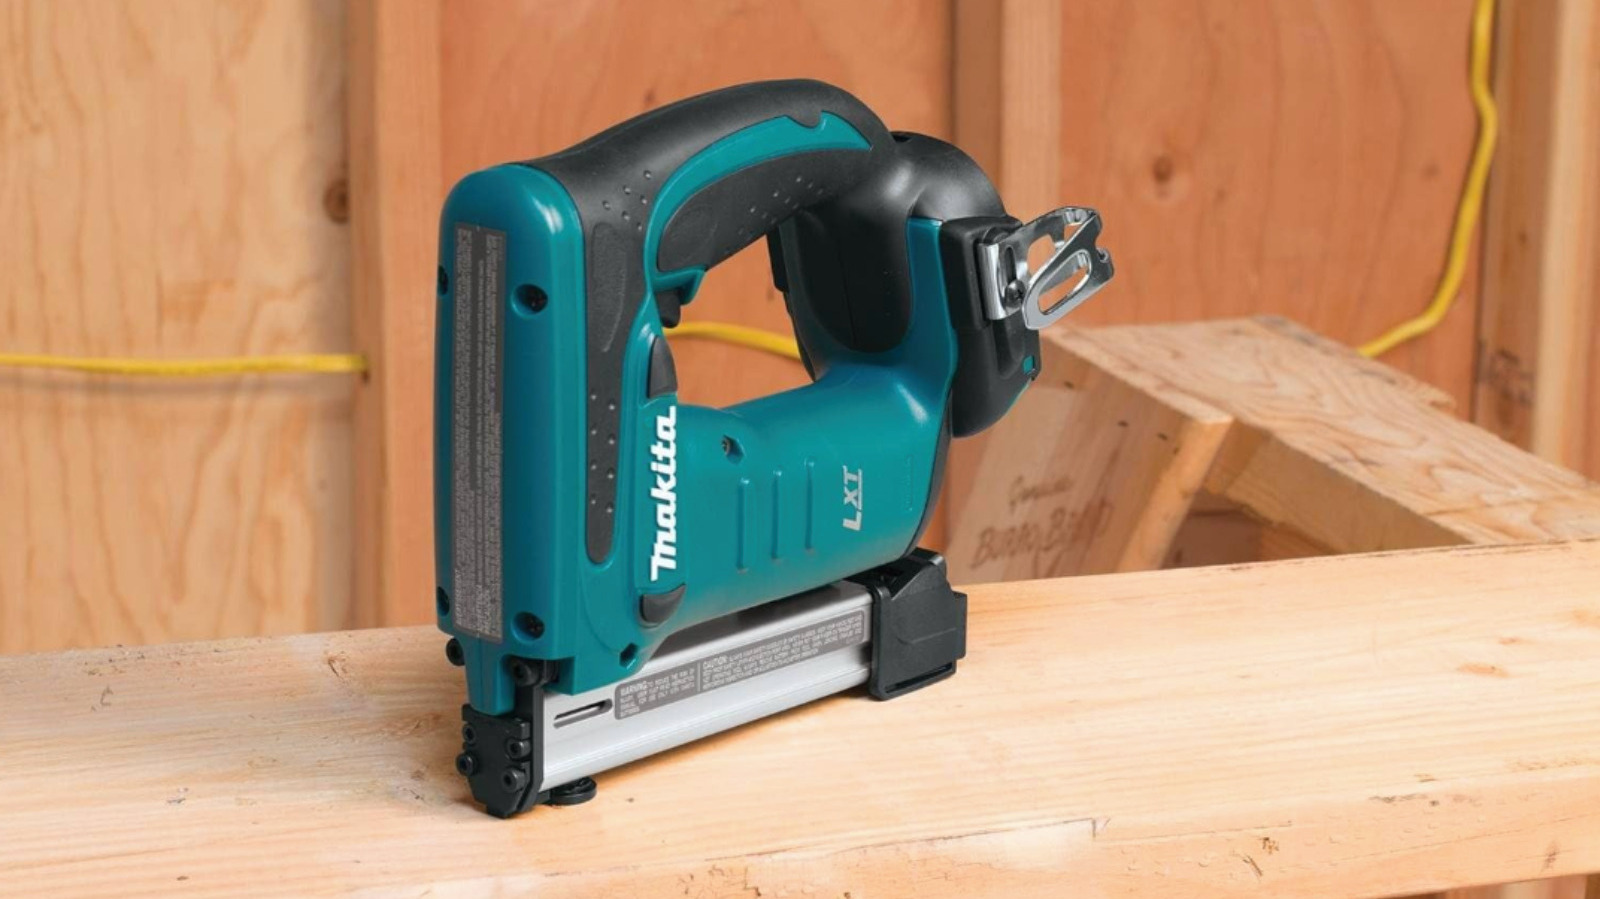 Makita's Staple Gun: Everything You Need To Know Before You Buy